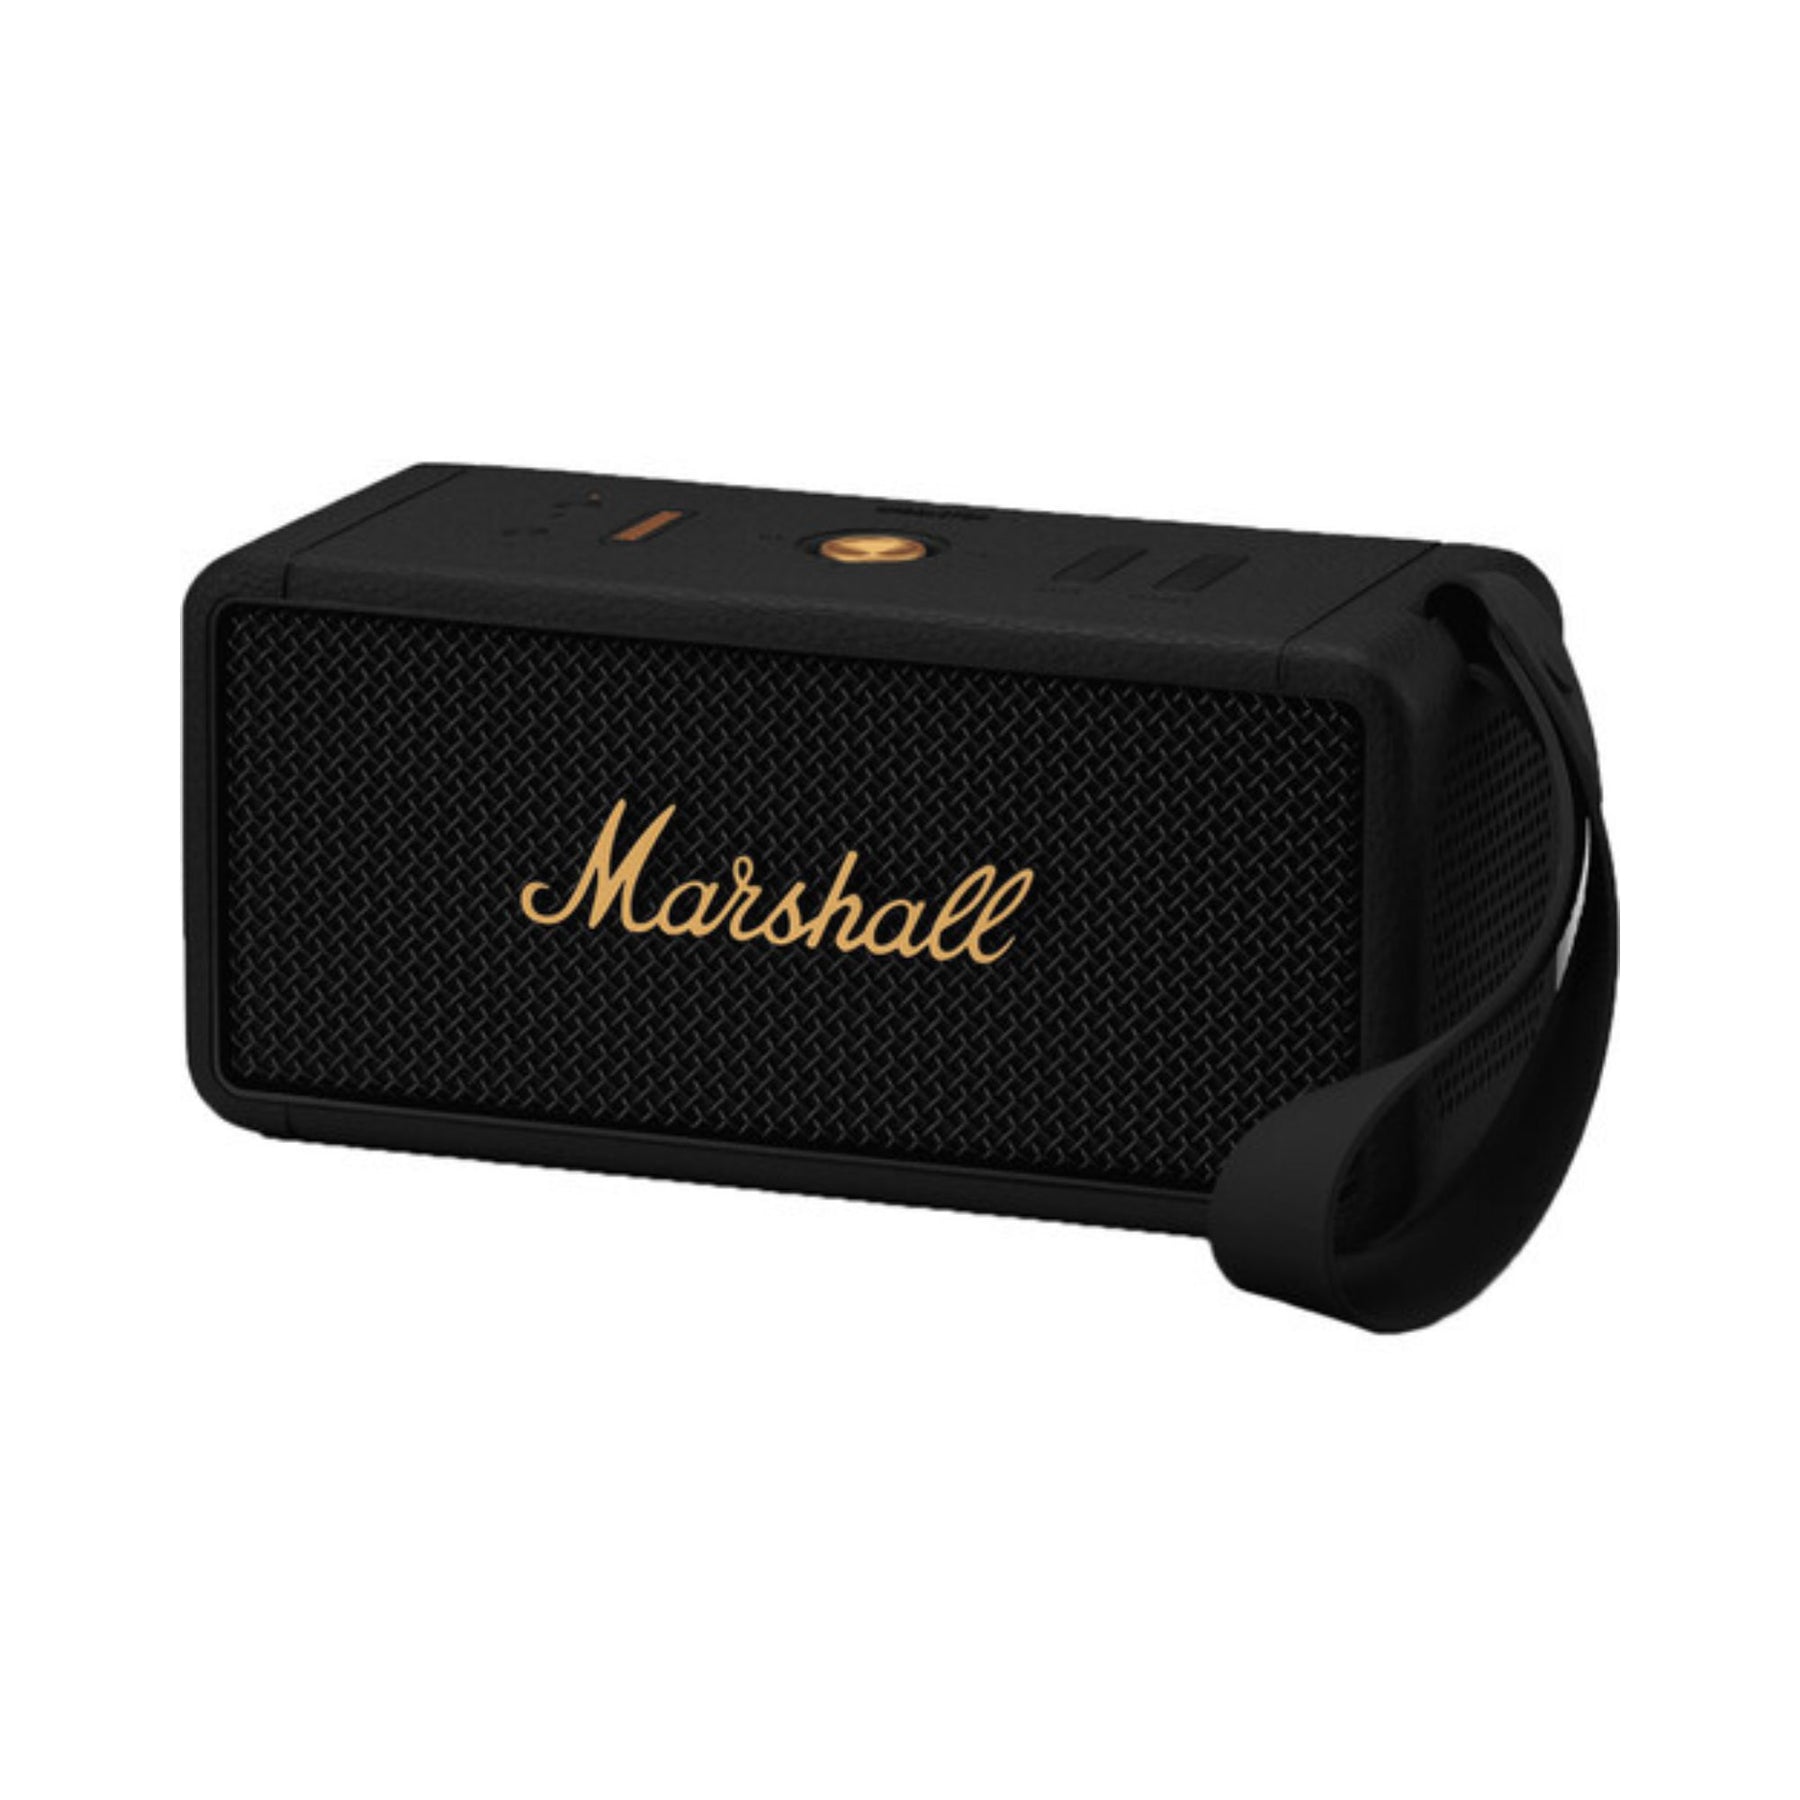 The Marshall Middleton Bluetooth speaker is ready to rock